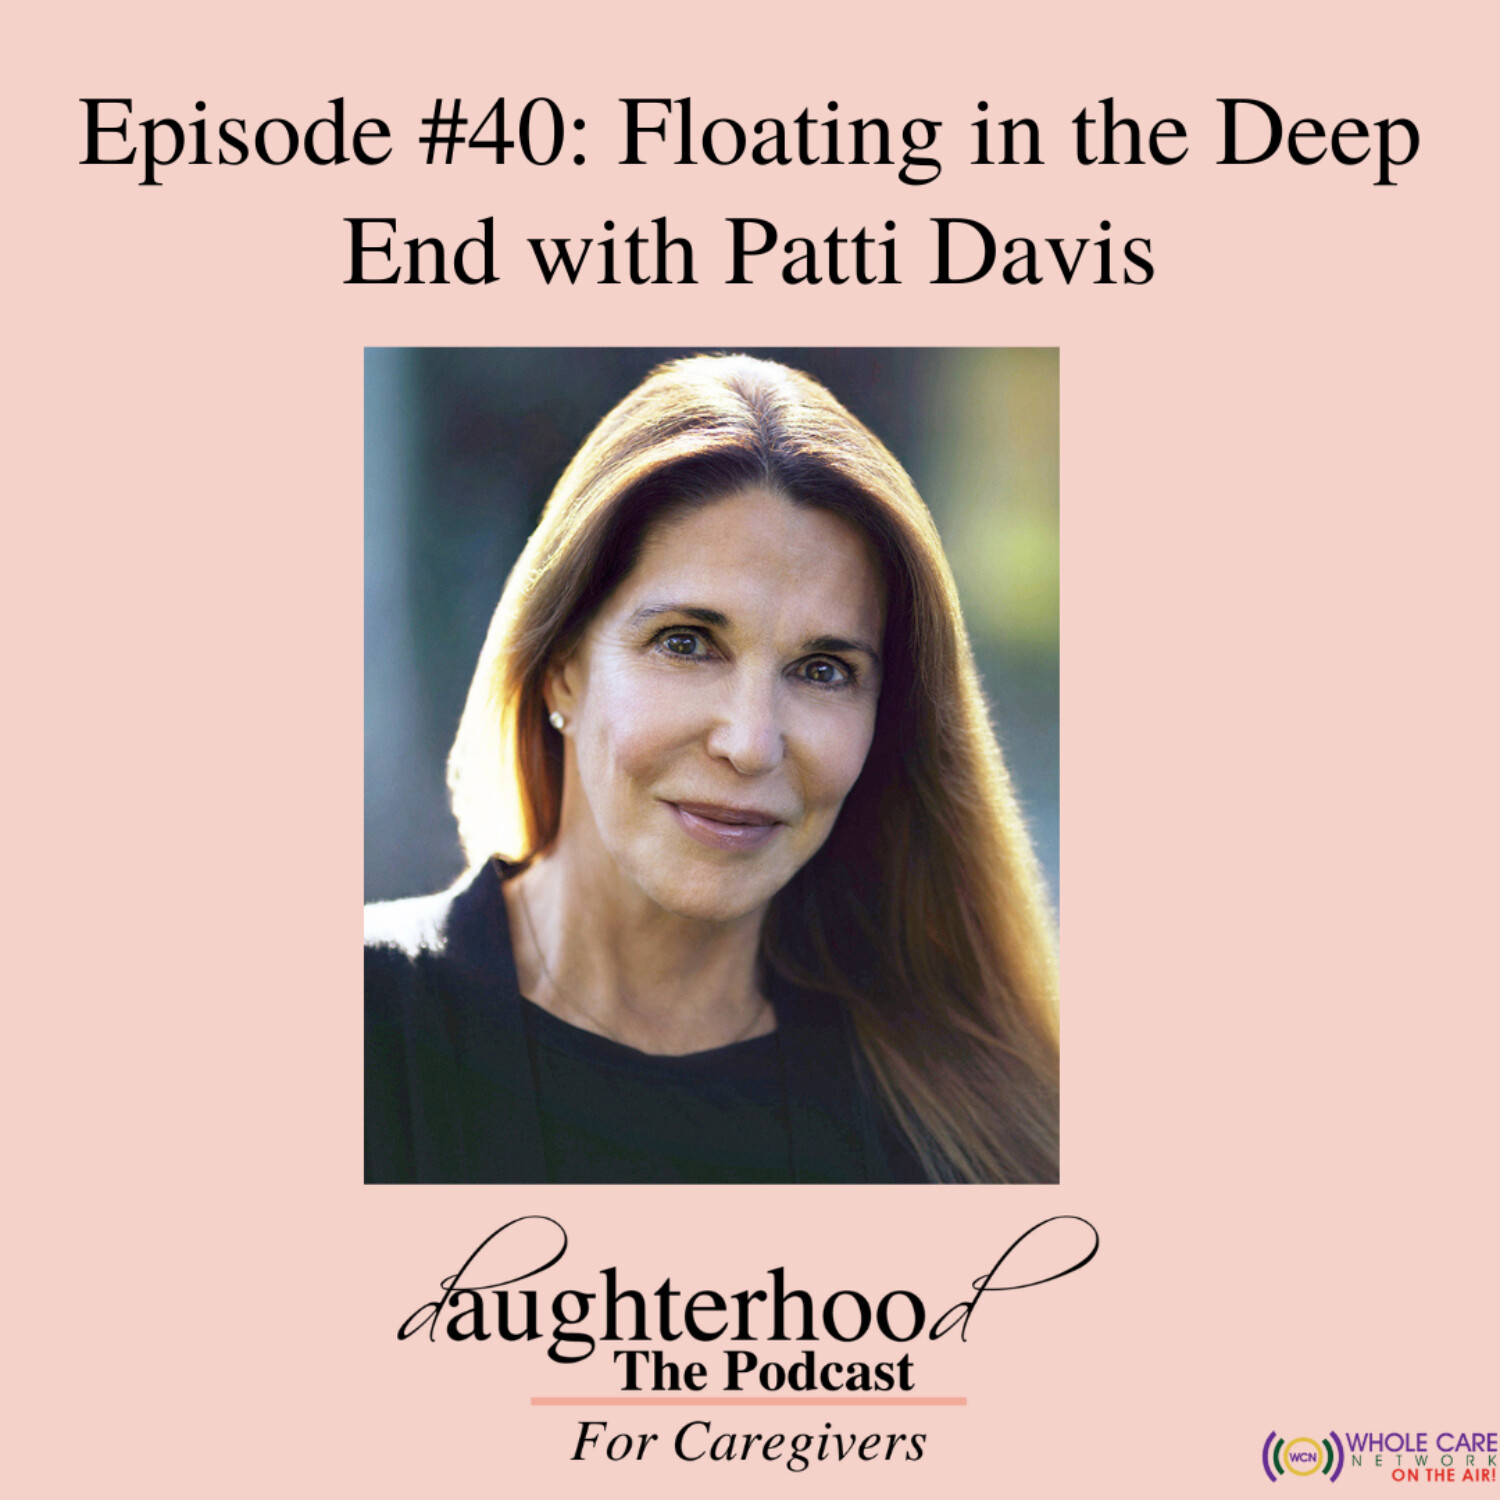 Floating in the Deep End with Patti Davis